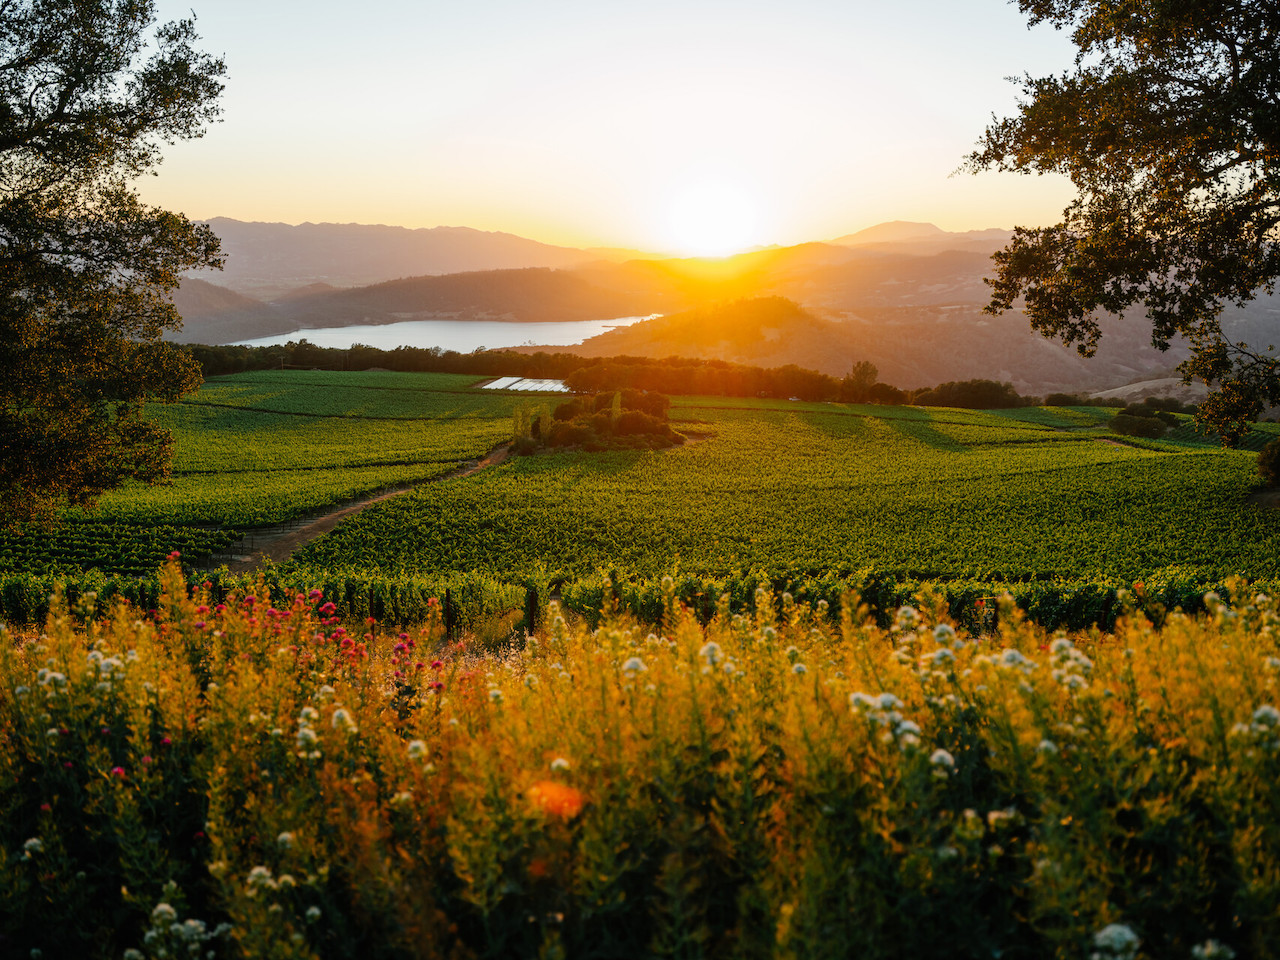 Four Seasons Drive Experience has created an indulgent new itinerary that showcases the beauty of Napa Valley in the fall. 